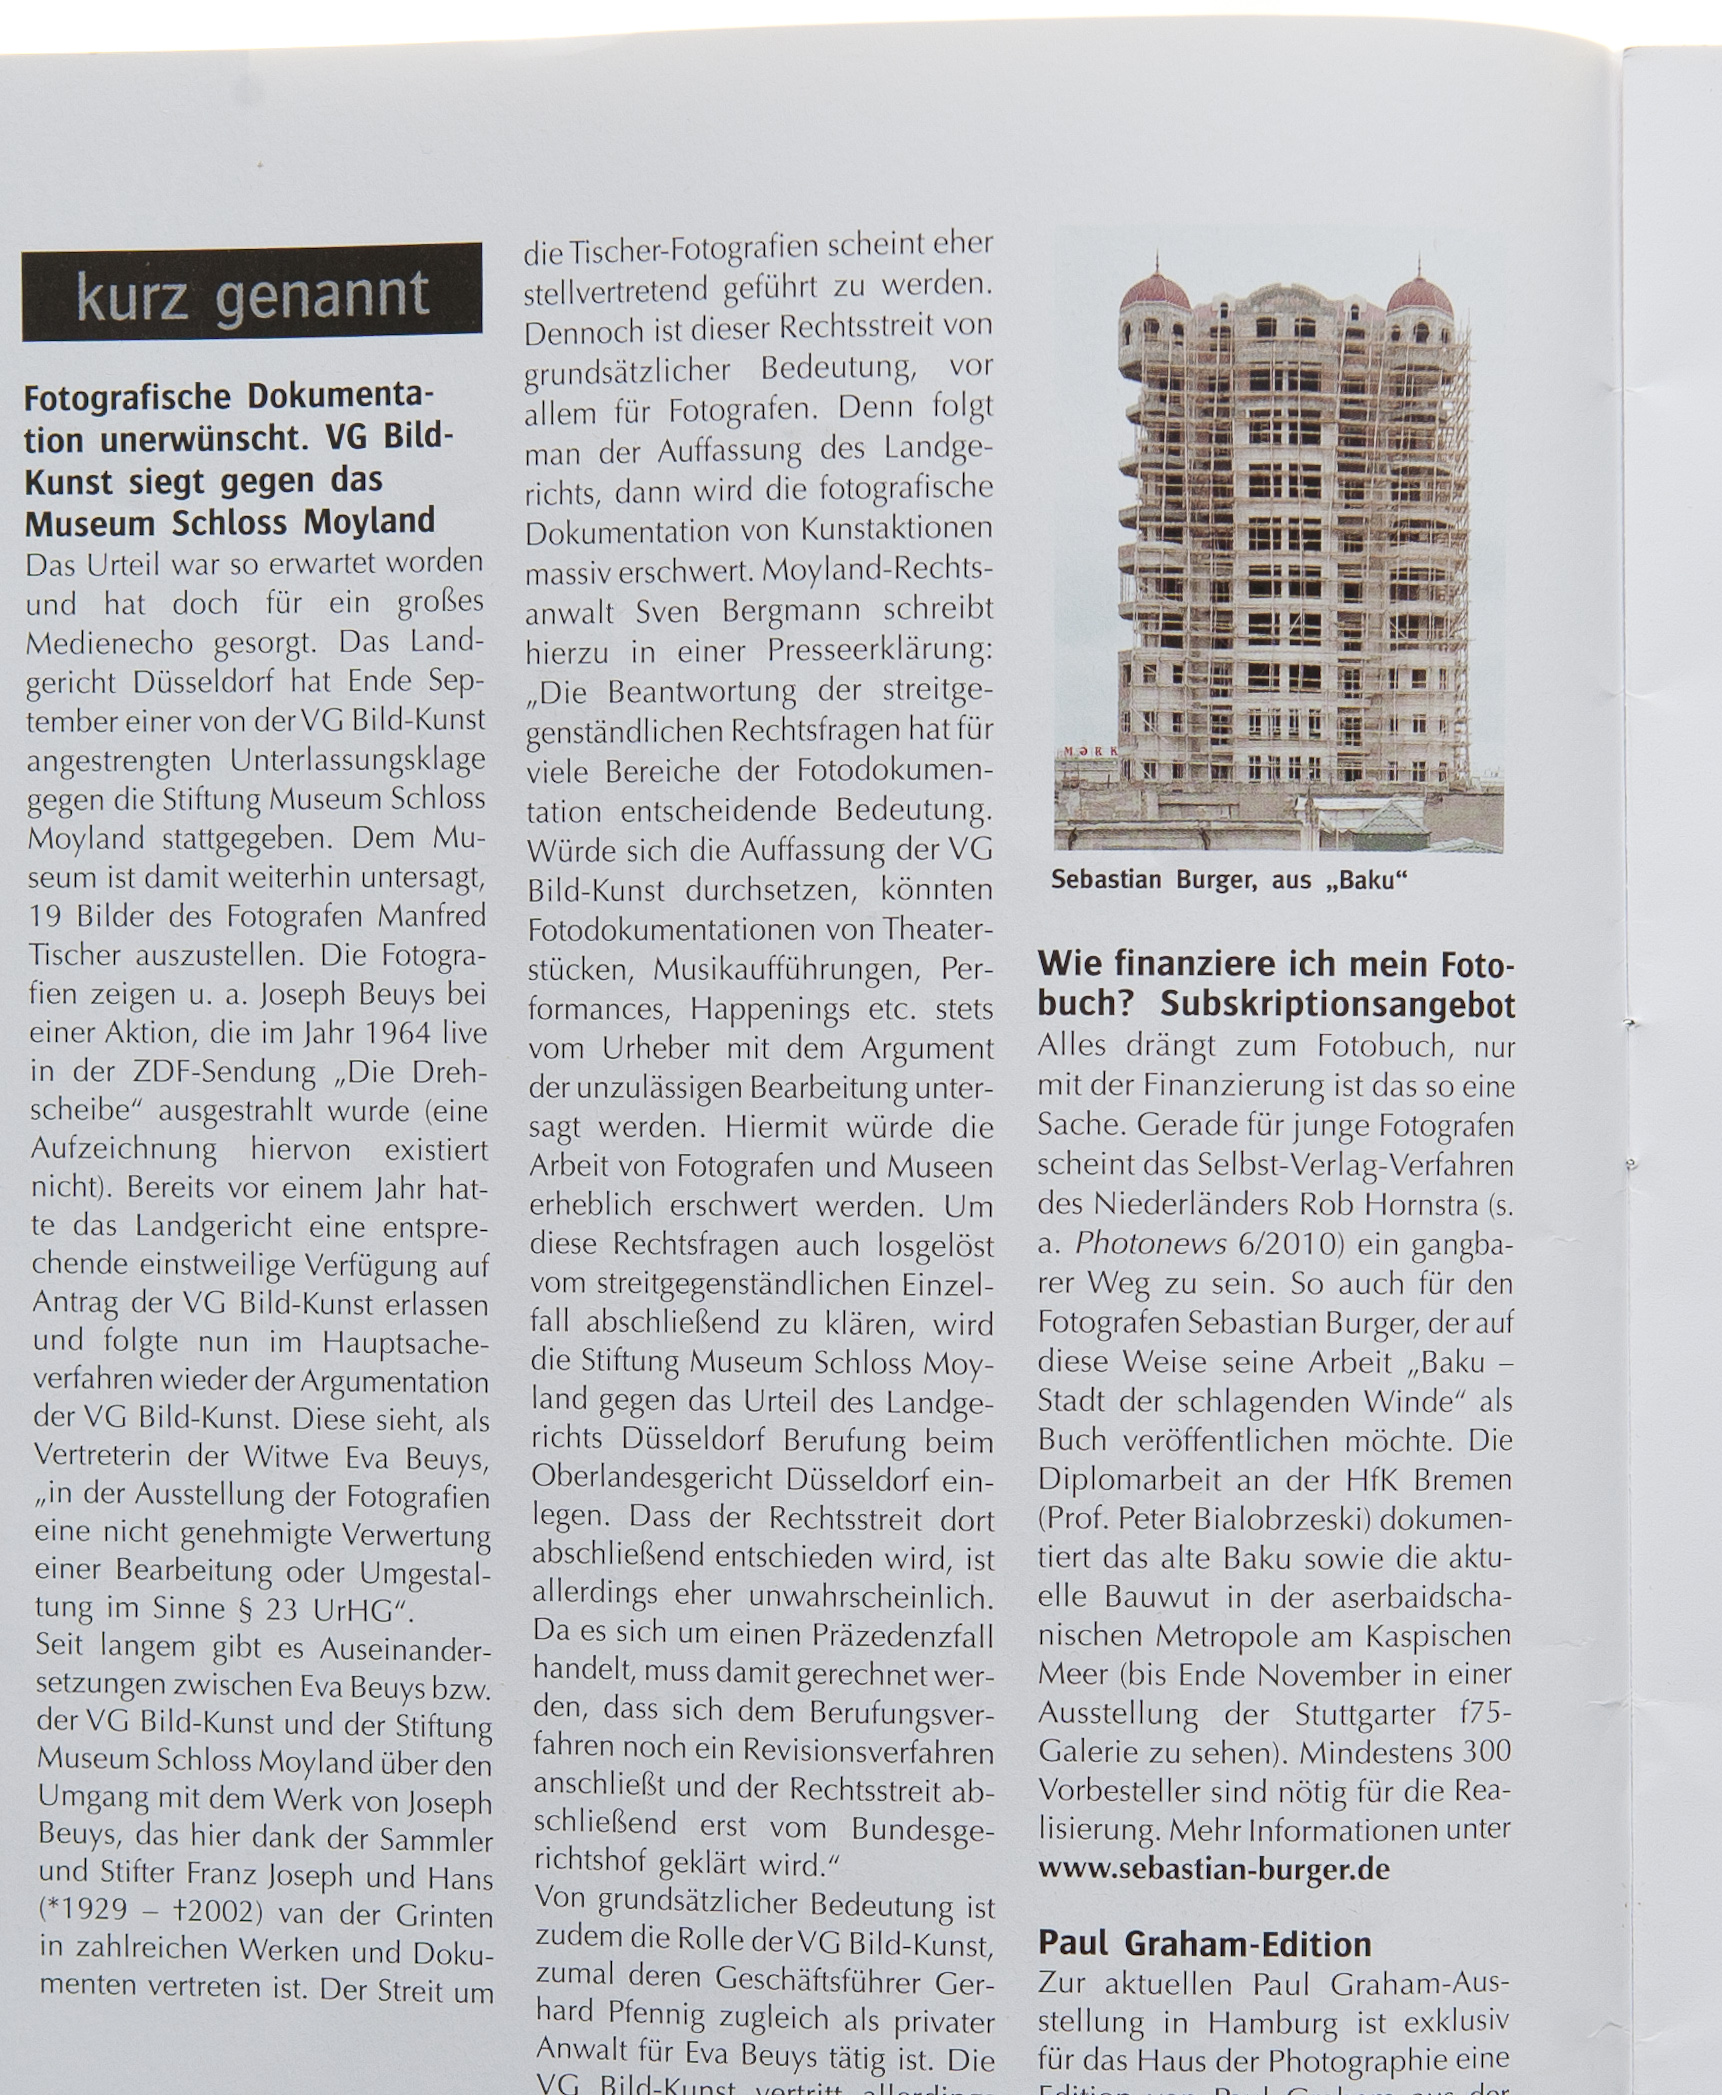 Photo Presse 10/14/2010 about the process of financing the book